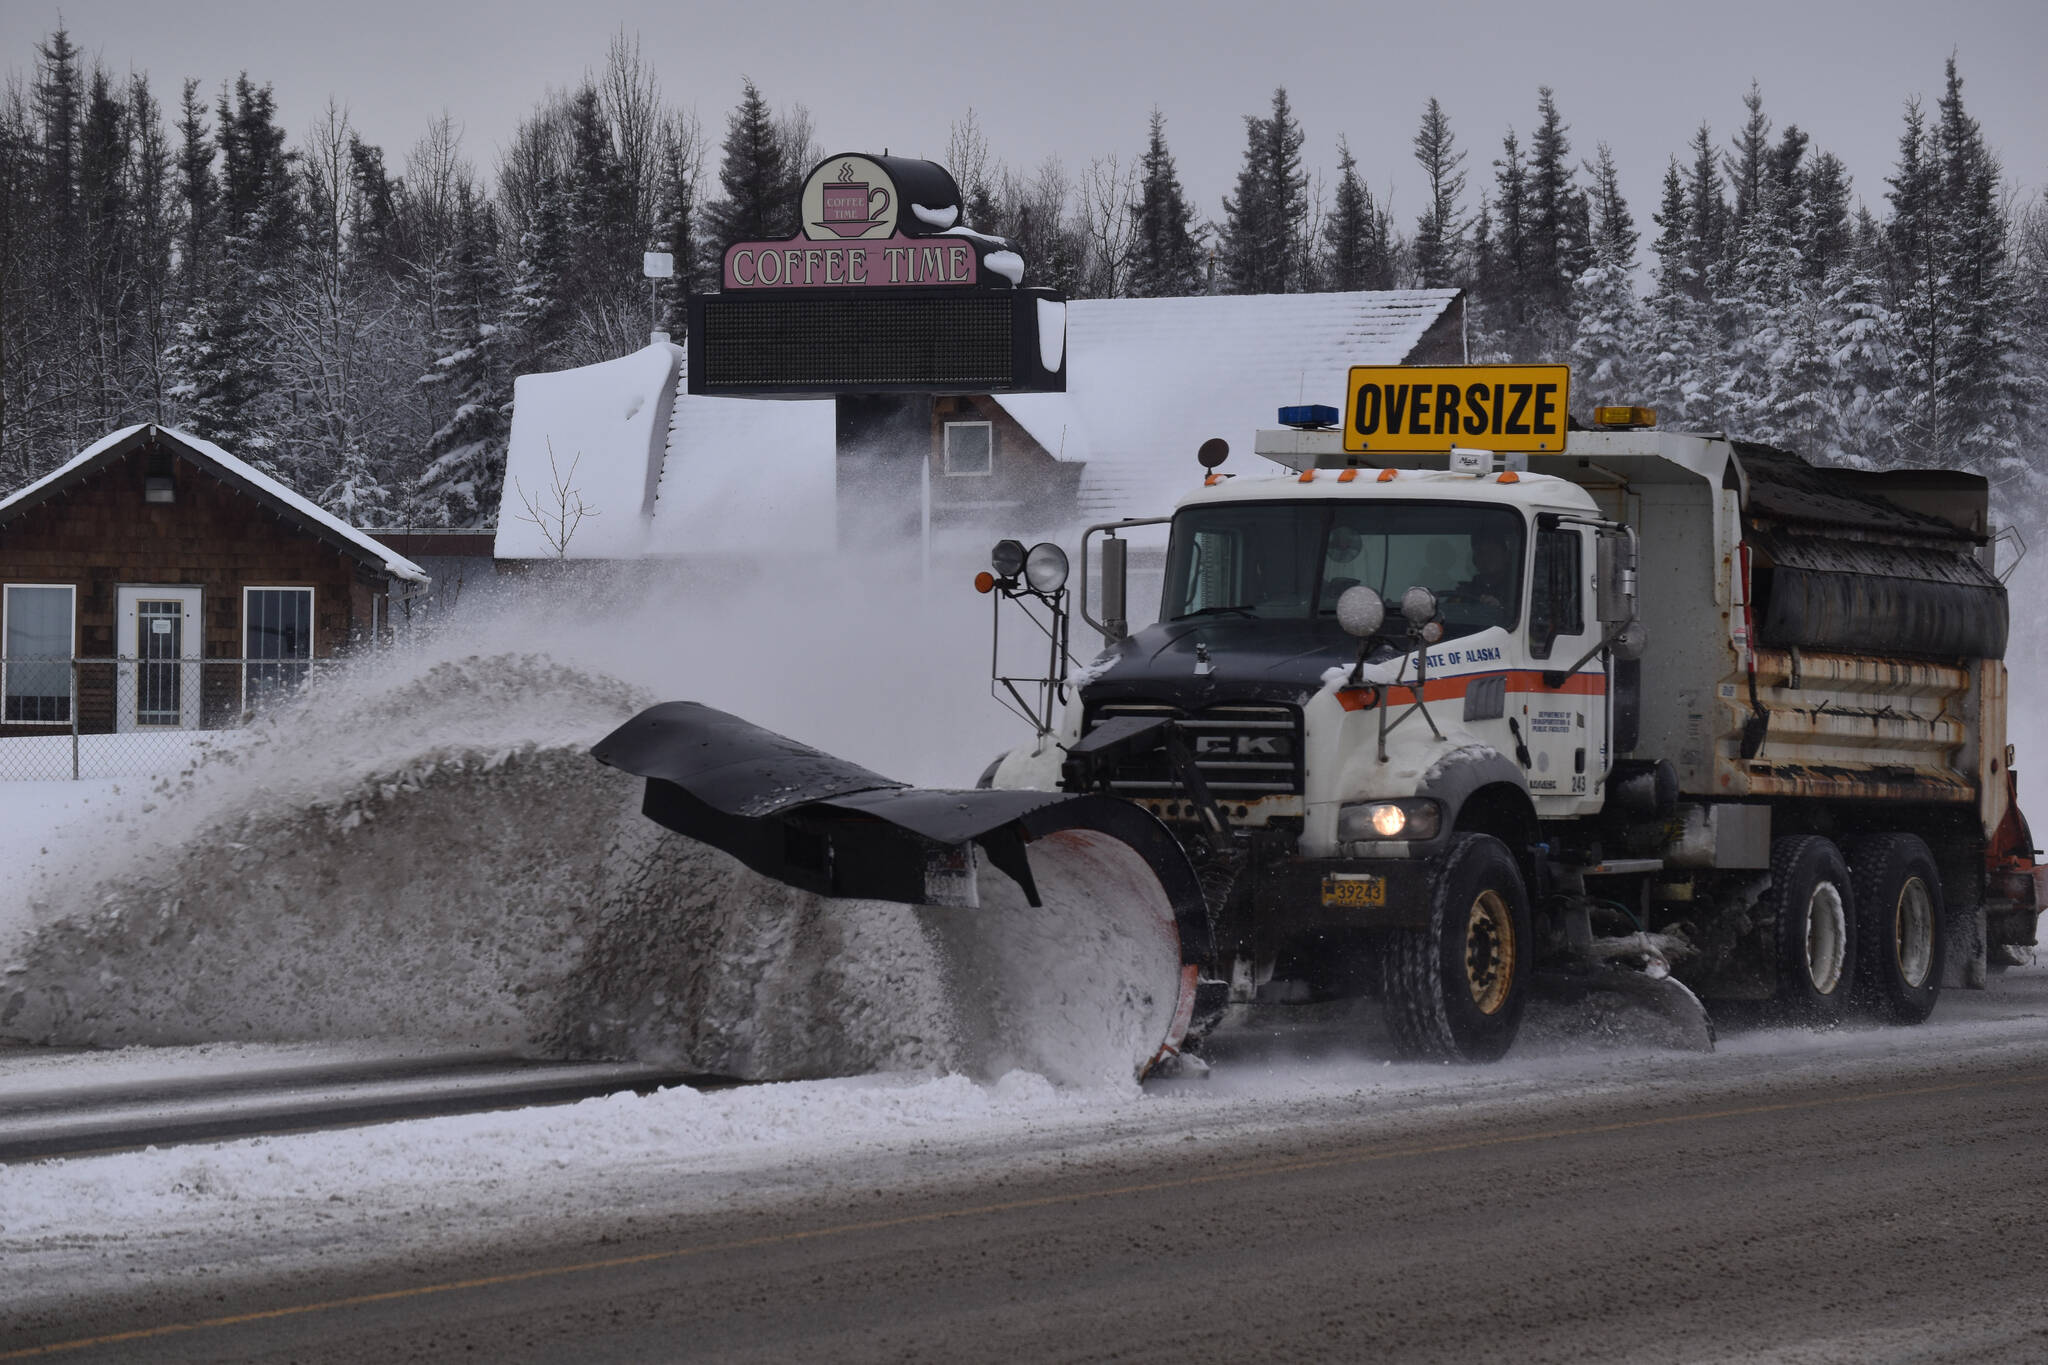 A plow truck clears snow from the Kenai Spur Highway on Wednesday, Nov. 2, 2022, in Kenai, Alaska. (Jake Dye/Peninsula Clarion)